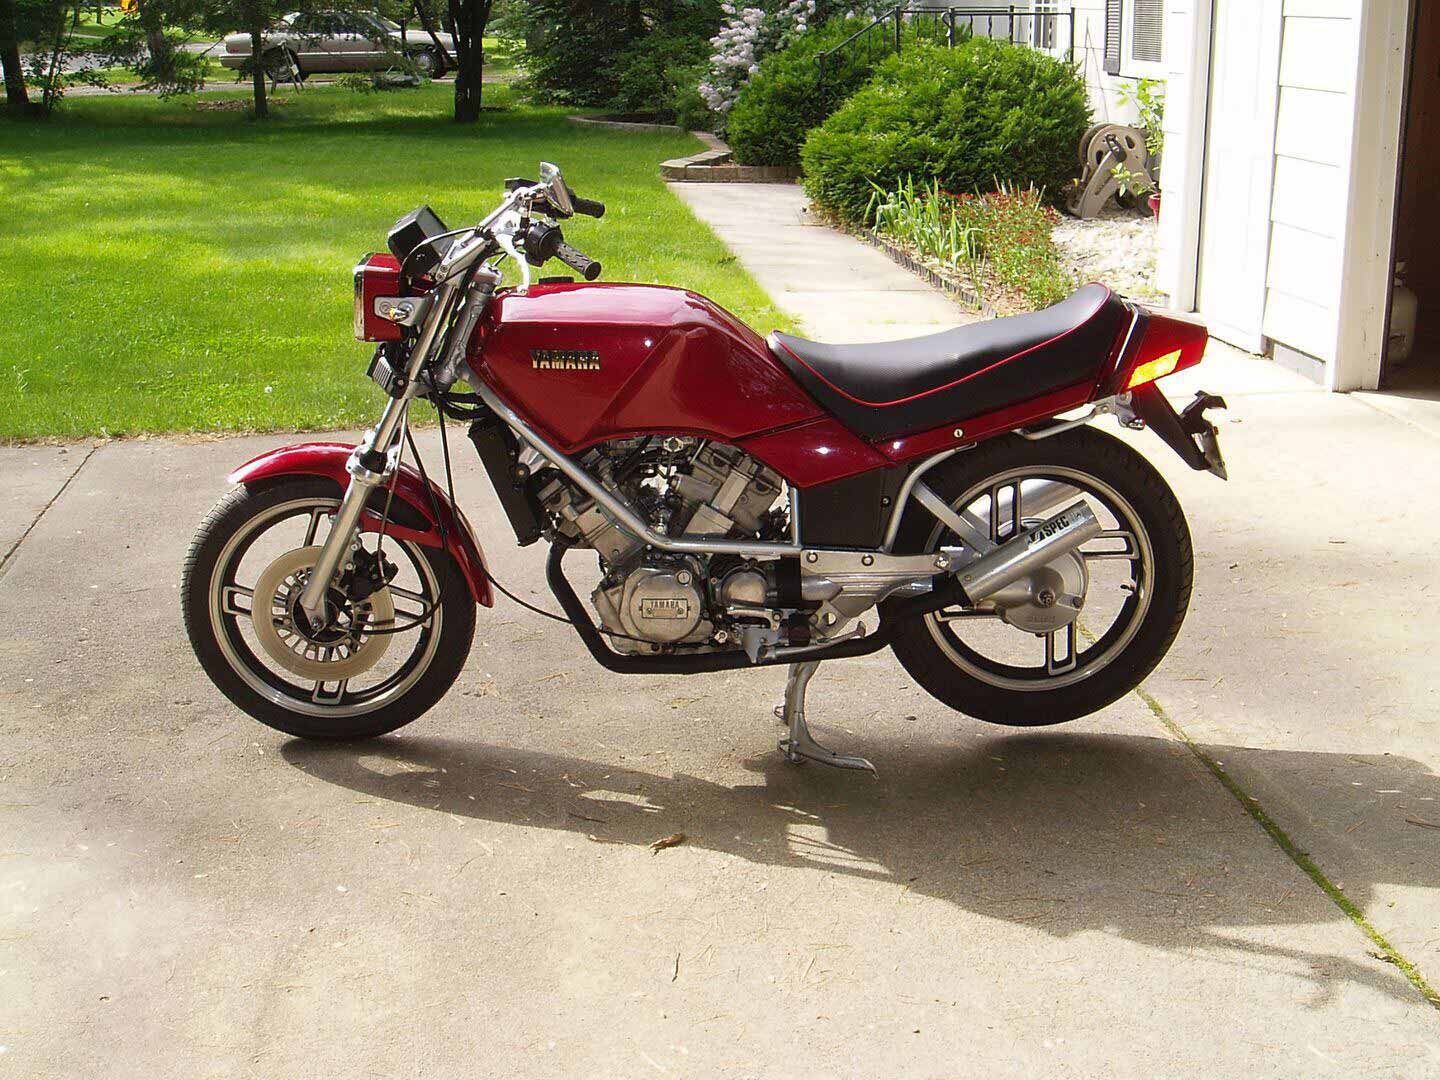 As Huey Lewis famously sang, it’s hip to be square. The 1982 Yamaha XZ550 Vision.